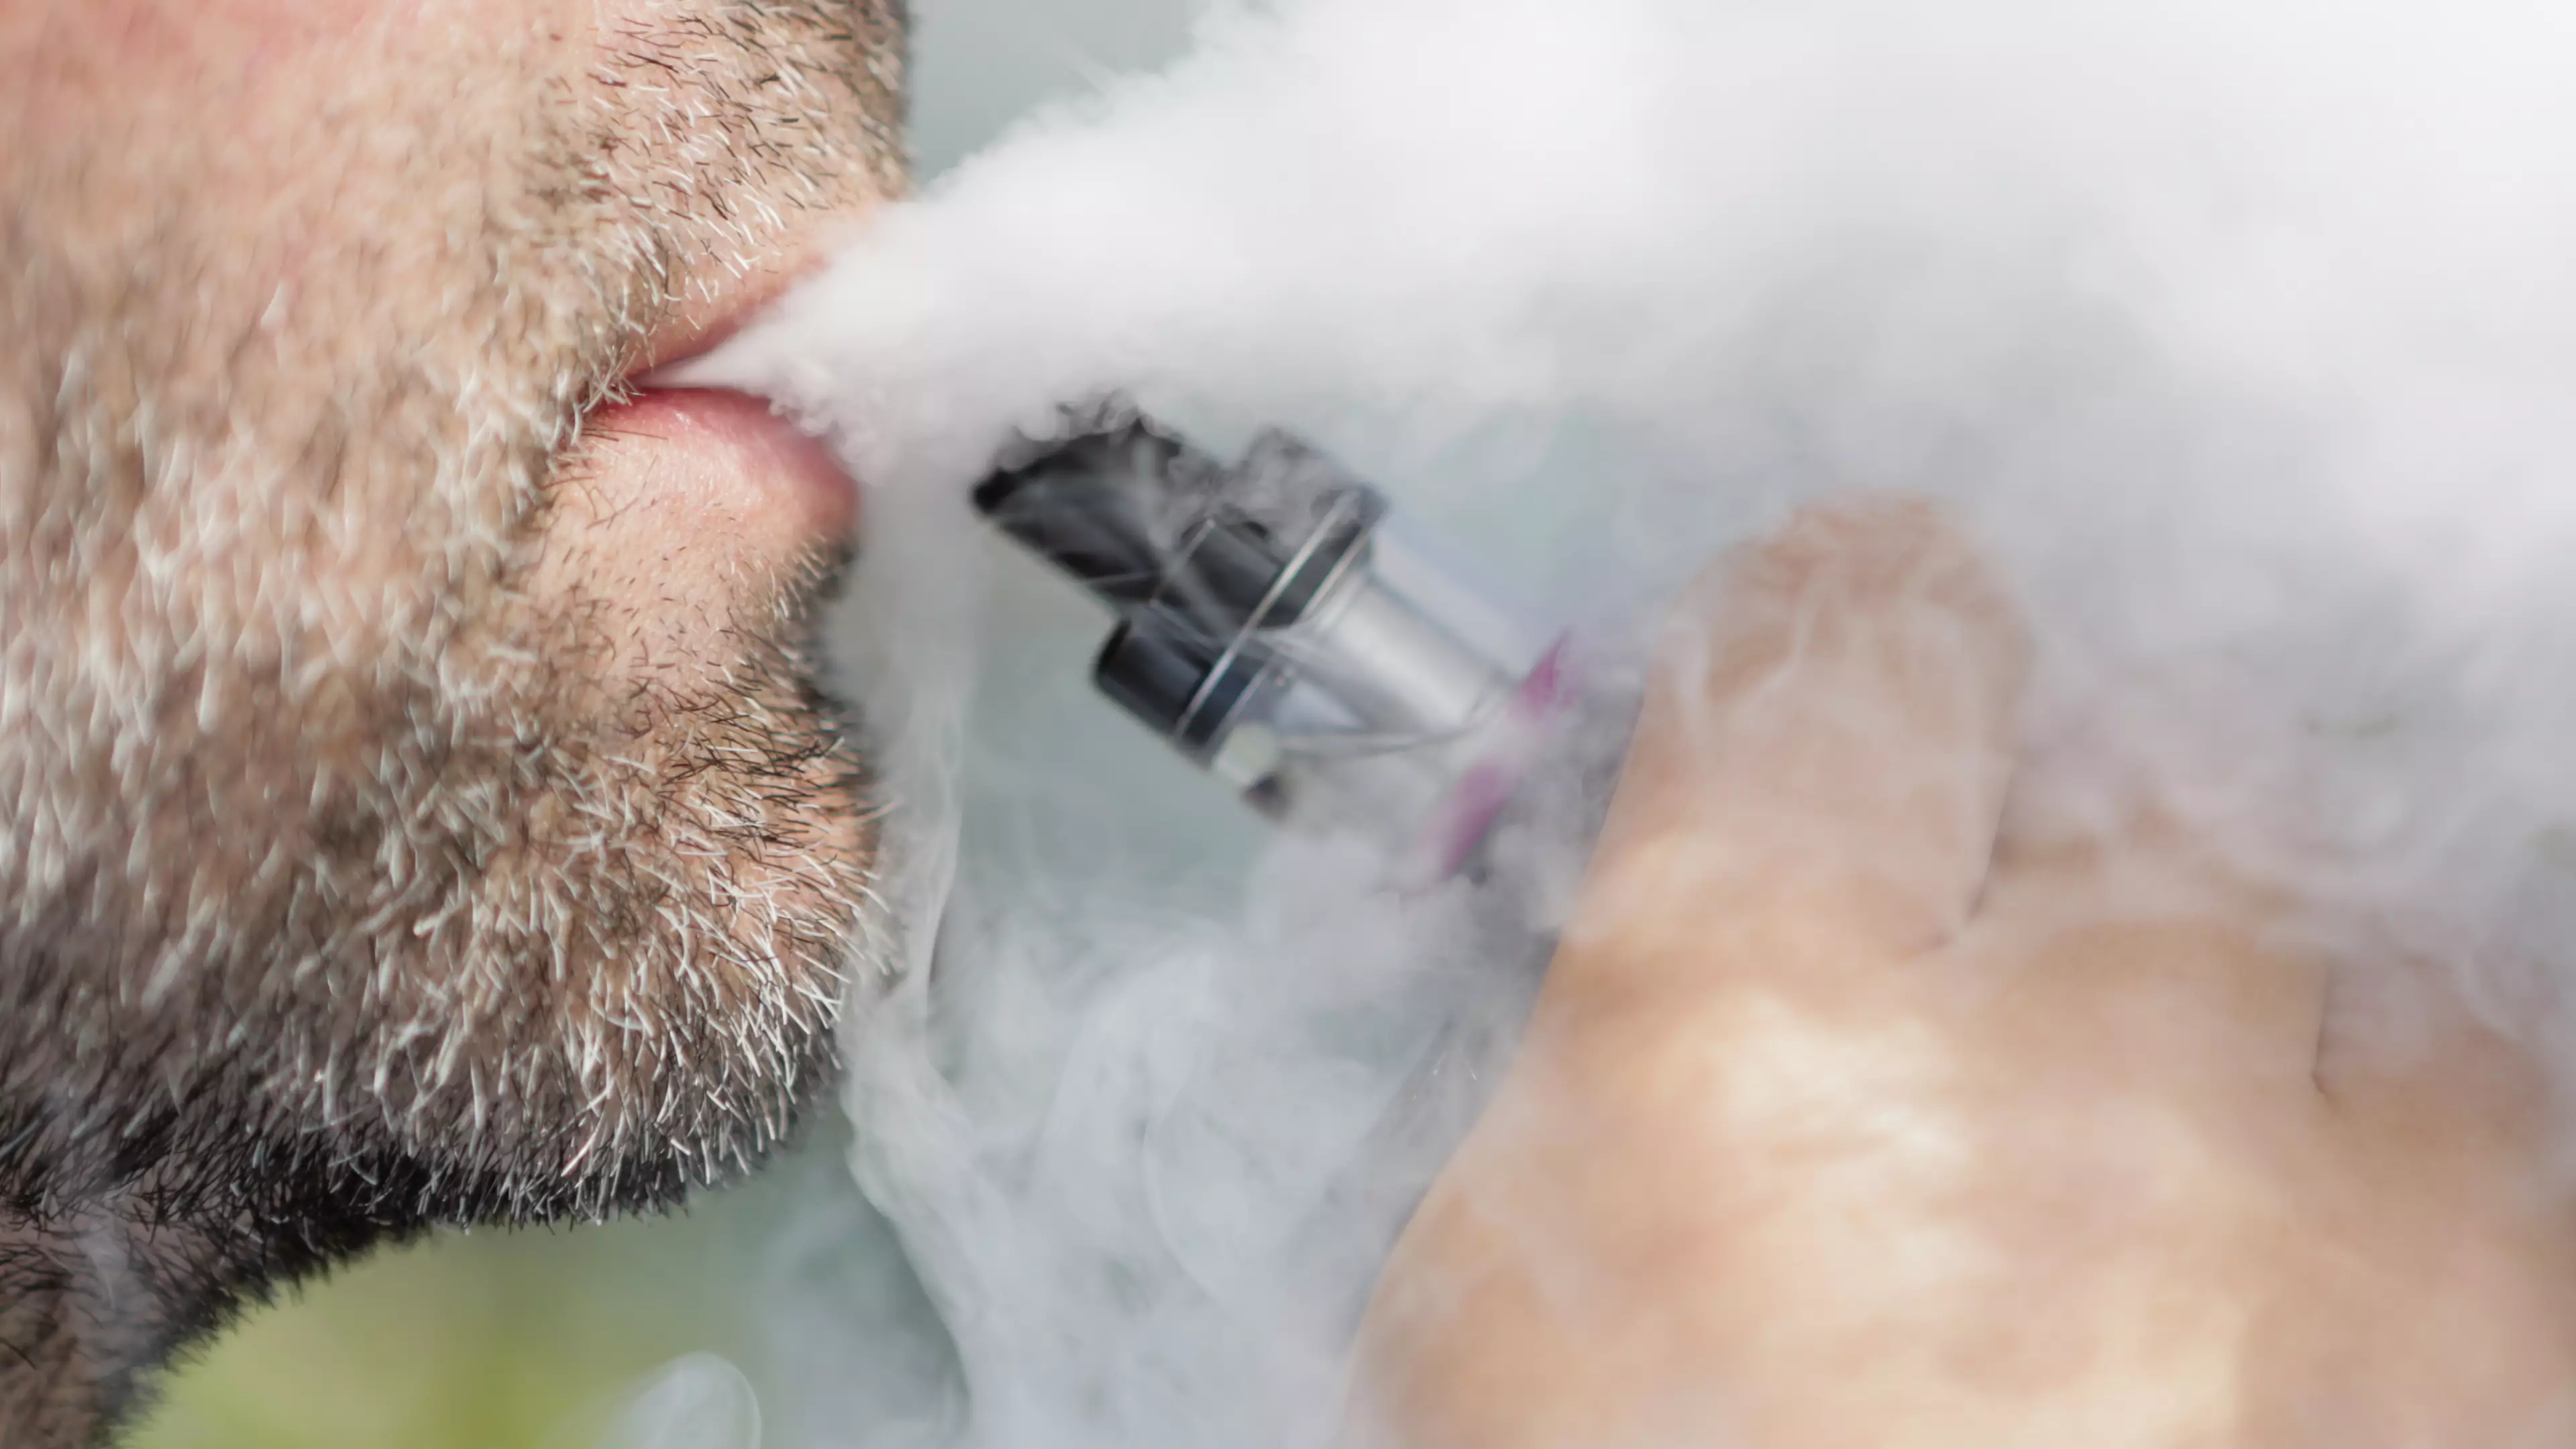 Health Experts Accuse Tobacco Companies Of Using Vaping To Hook New Generation Onto Smoking